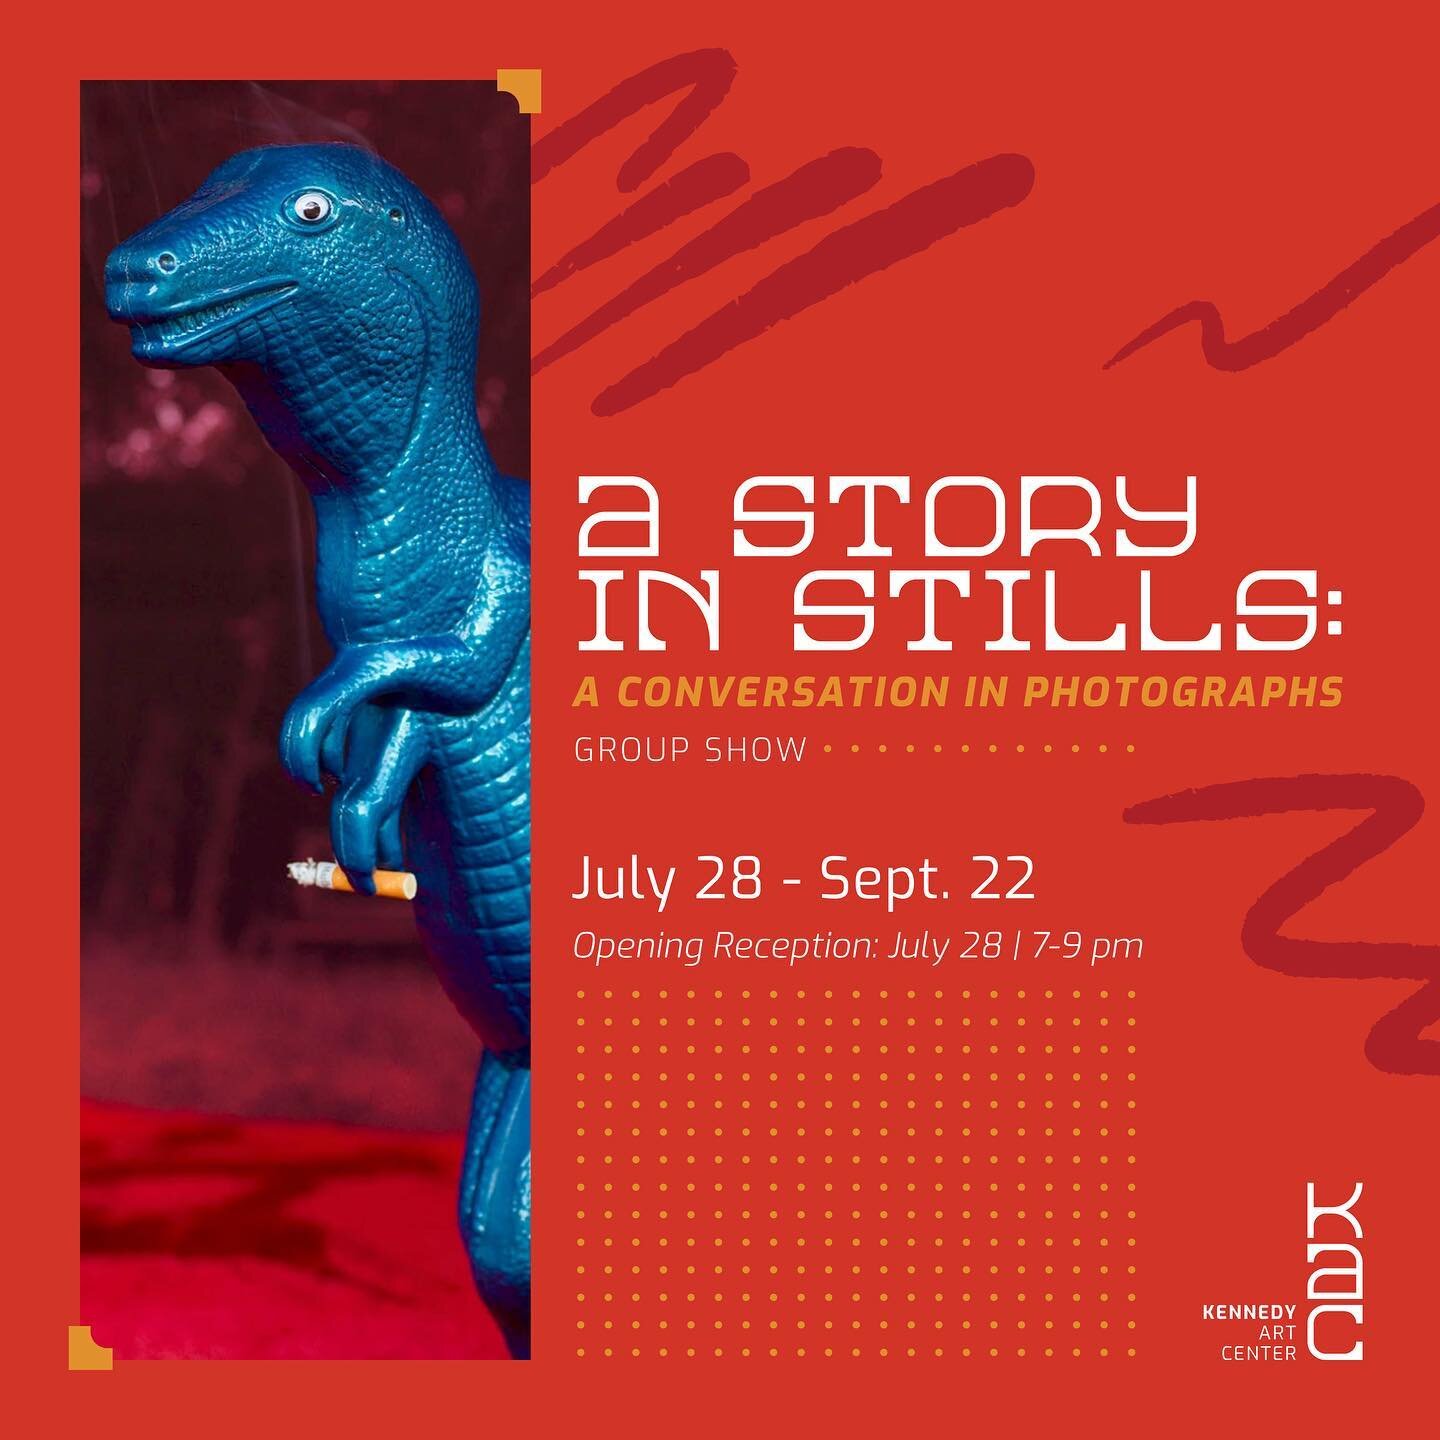 Our second-ever art exhibition, A Story in Stills, is opening 7:00 pm on Friday, July 28! Be there to celebrate the incredible local photographers whose work will be featured in the exhibit, and to be a part of our first KAC collaborative art project